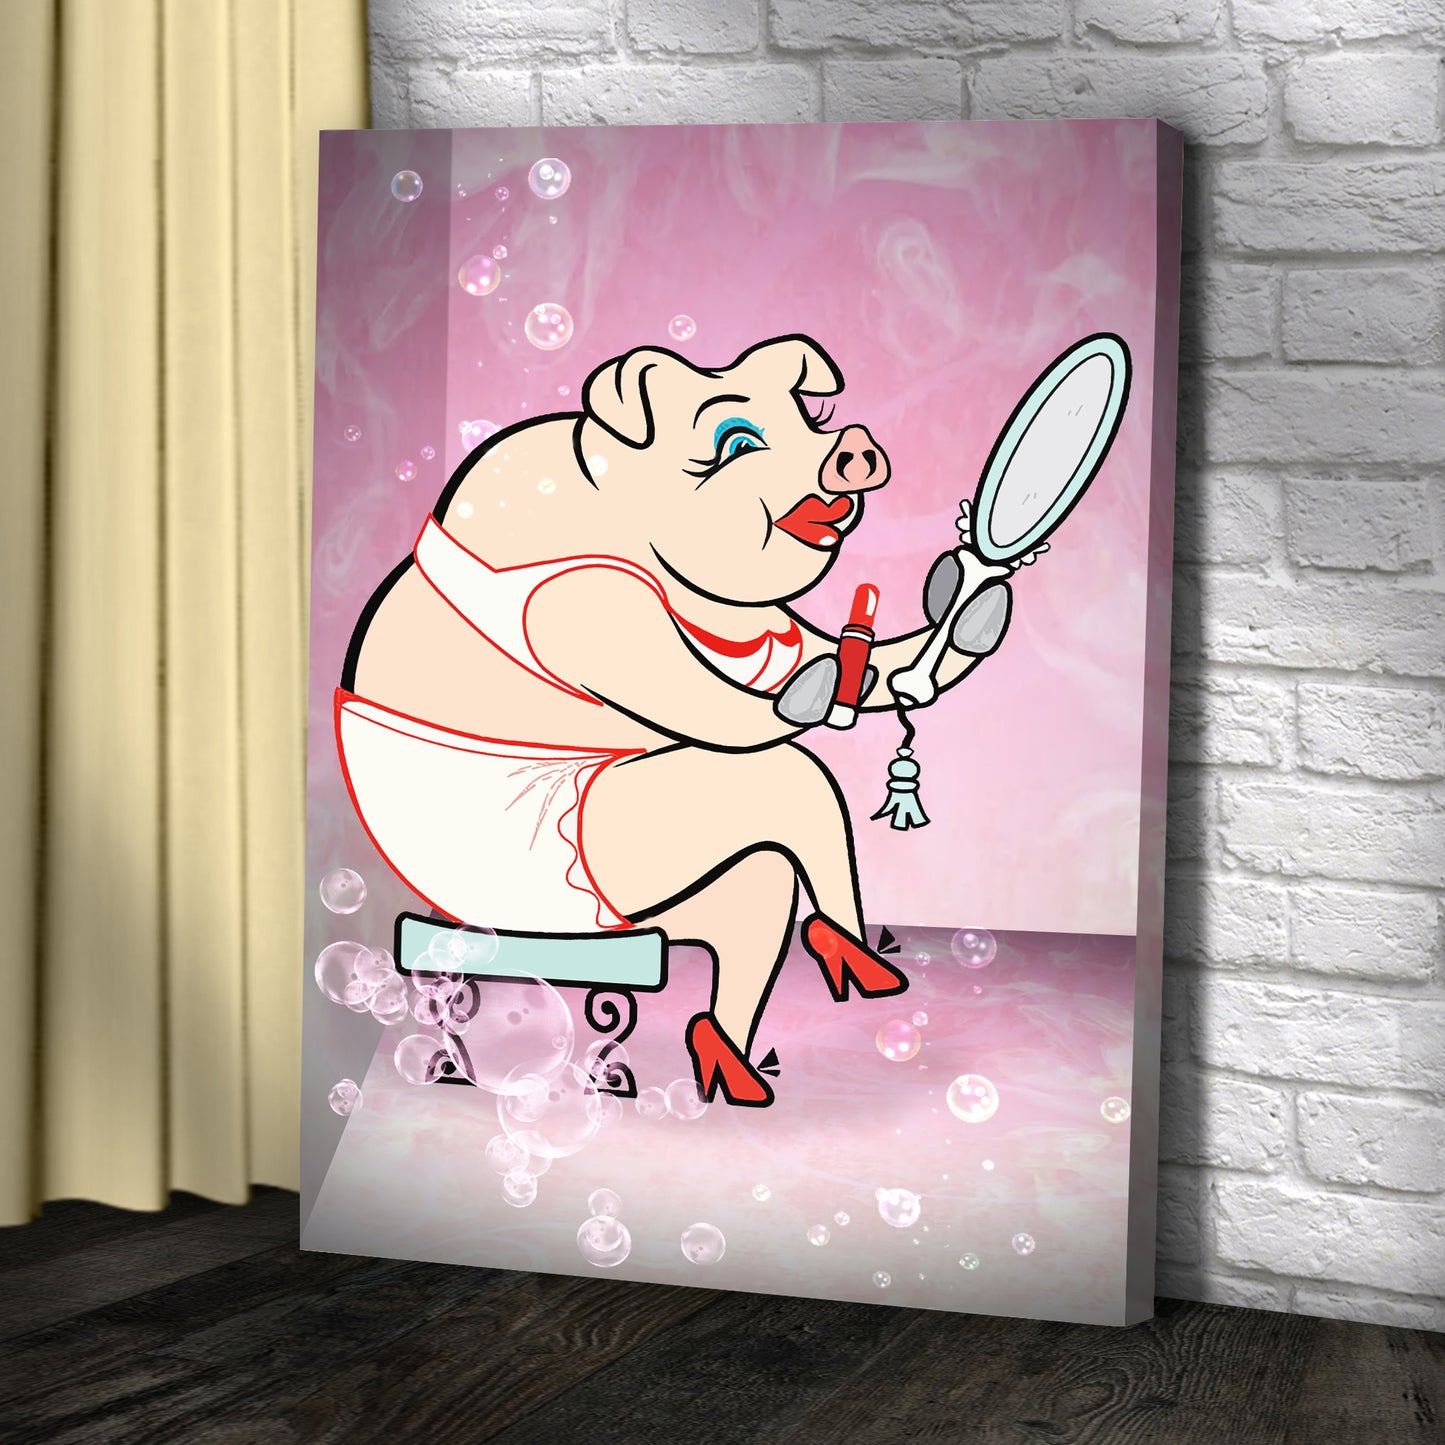 Sassy Pig Portrait Canvas Wall Art Style 1 - Image by Tailored Canvases